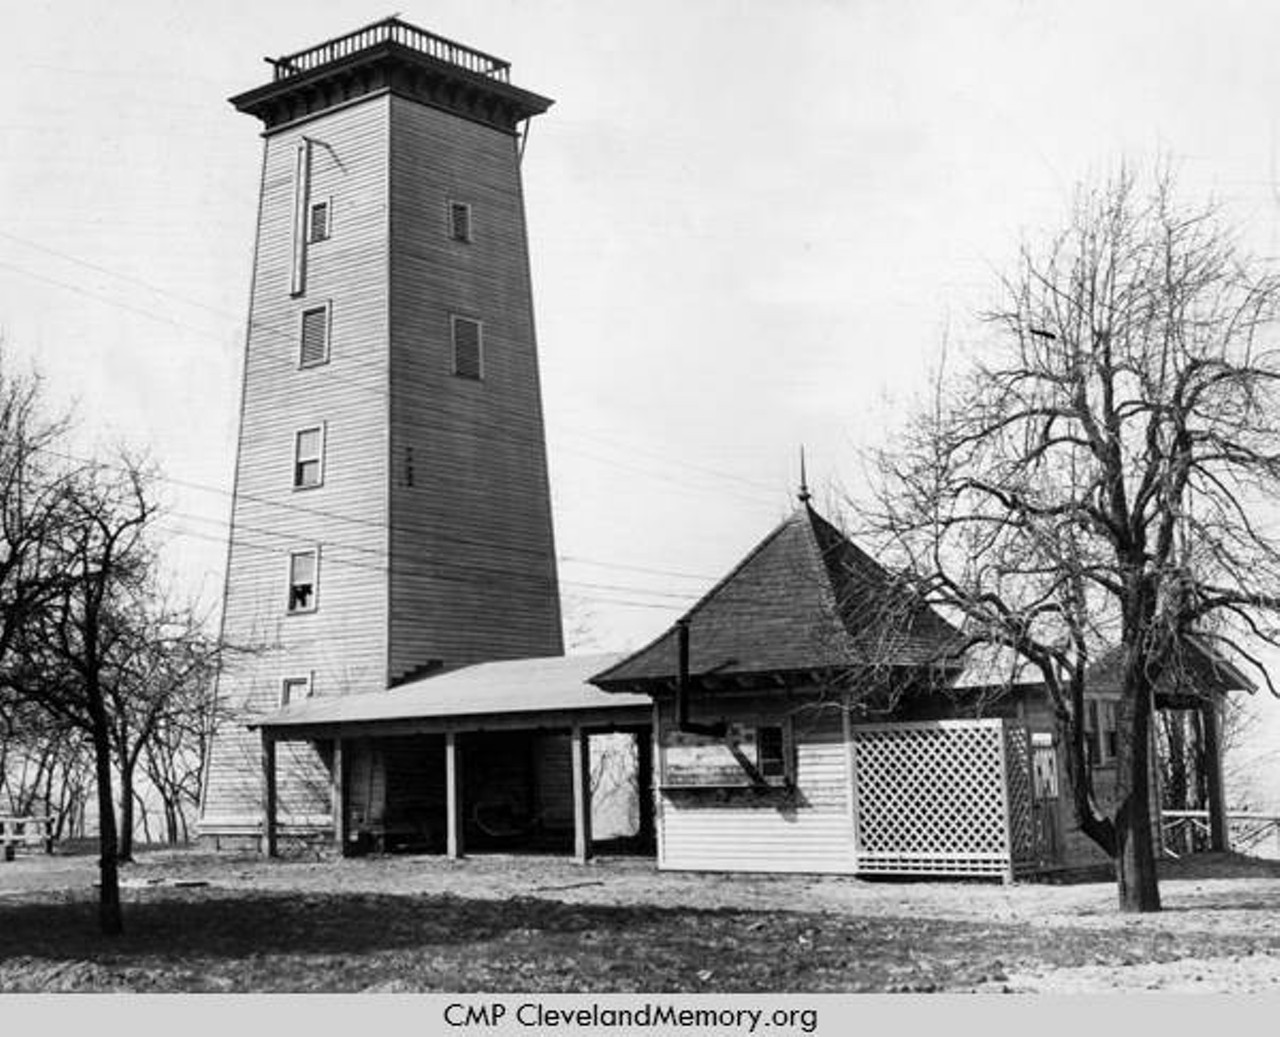  Old Water Tower, Huntington Park, 1935 